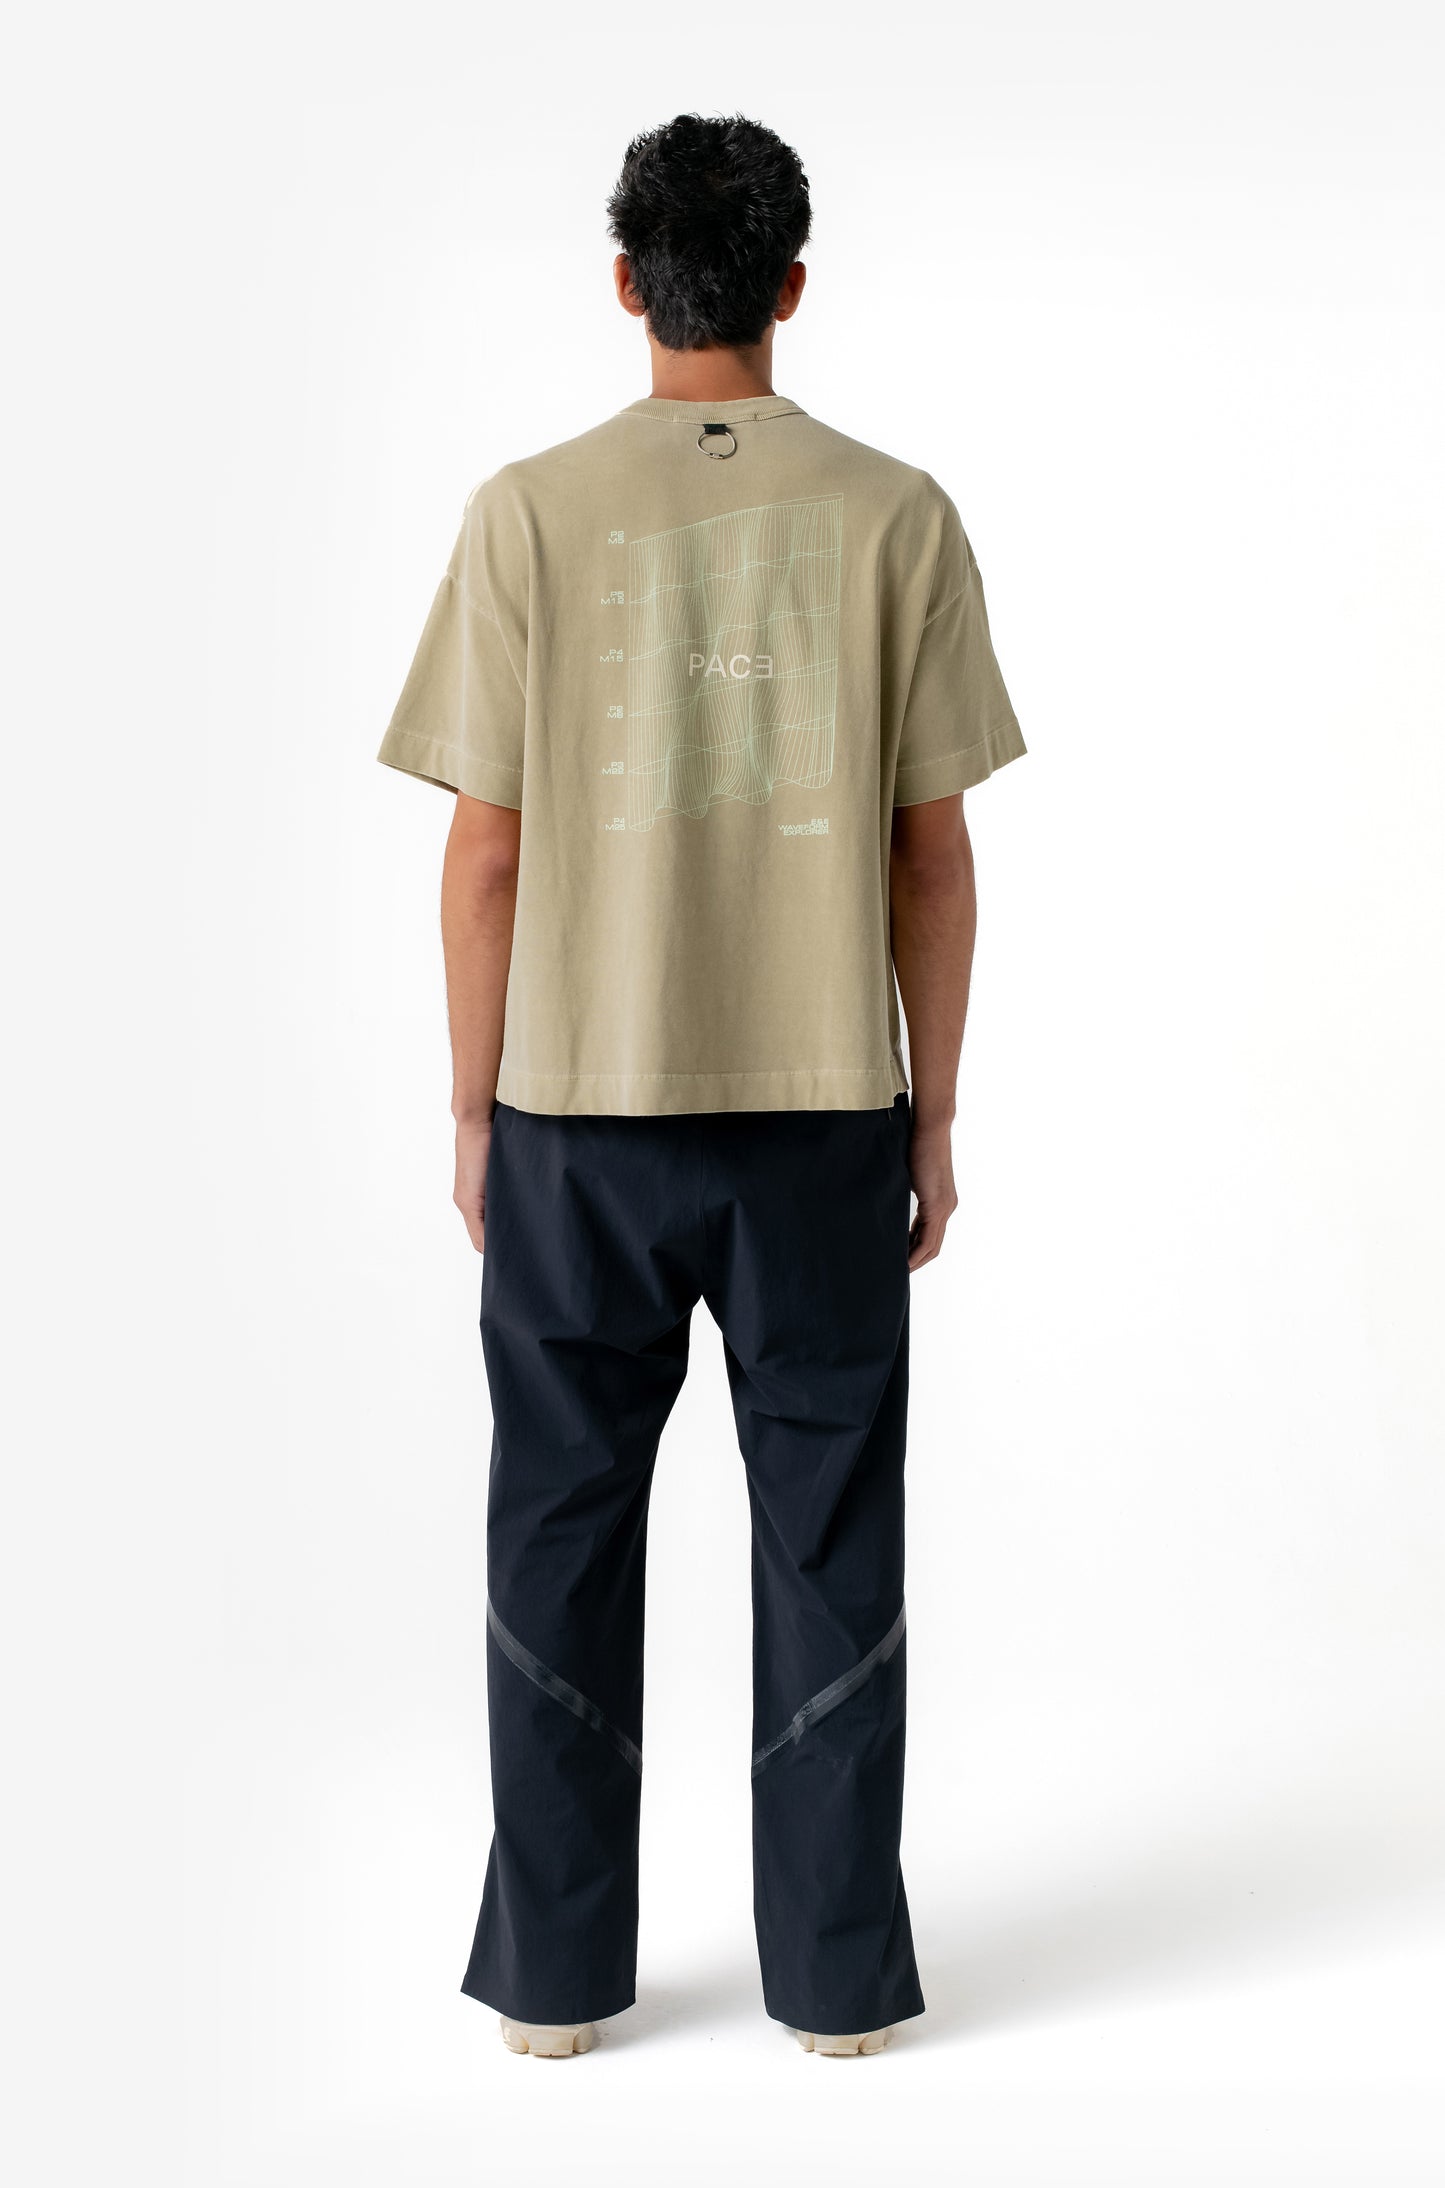 PACE - Wave Form Oversized Tee "Stone Green" - THE GAME